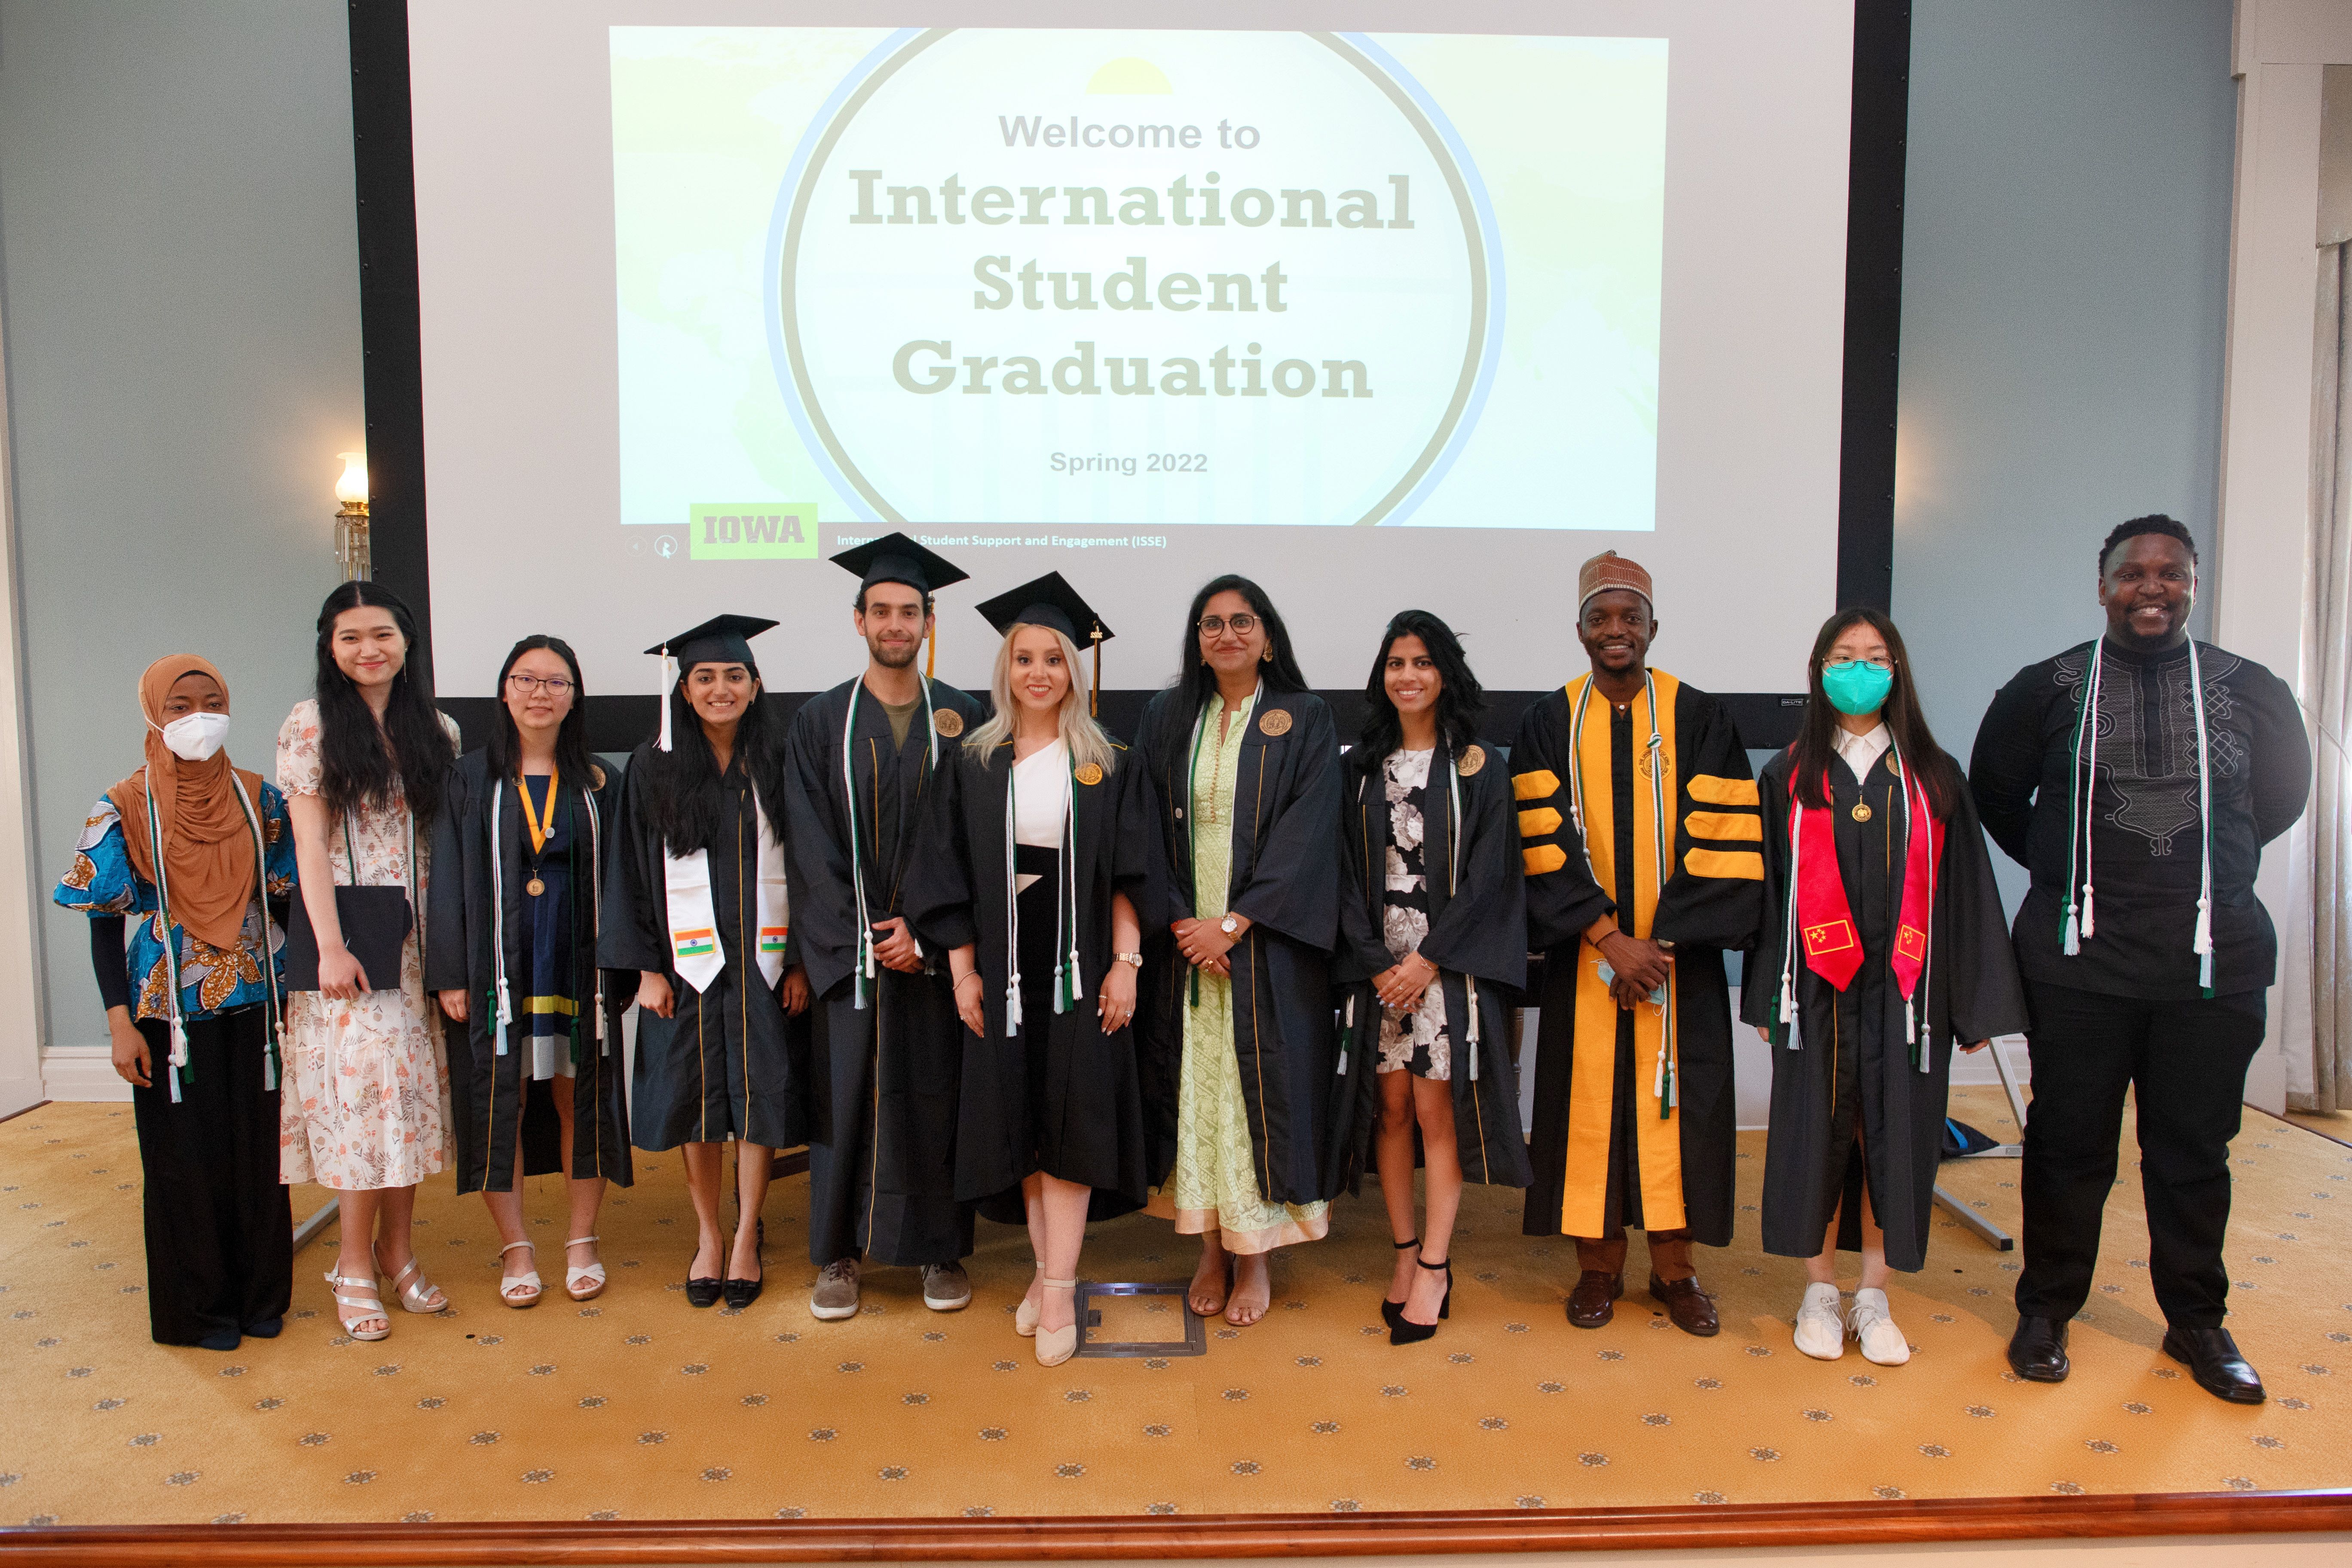 a group of international students wearing the international student graduation cord standing in front of a screen says "welcome to international student graduation" 